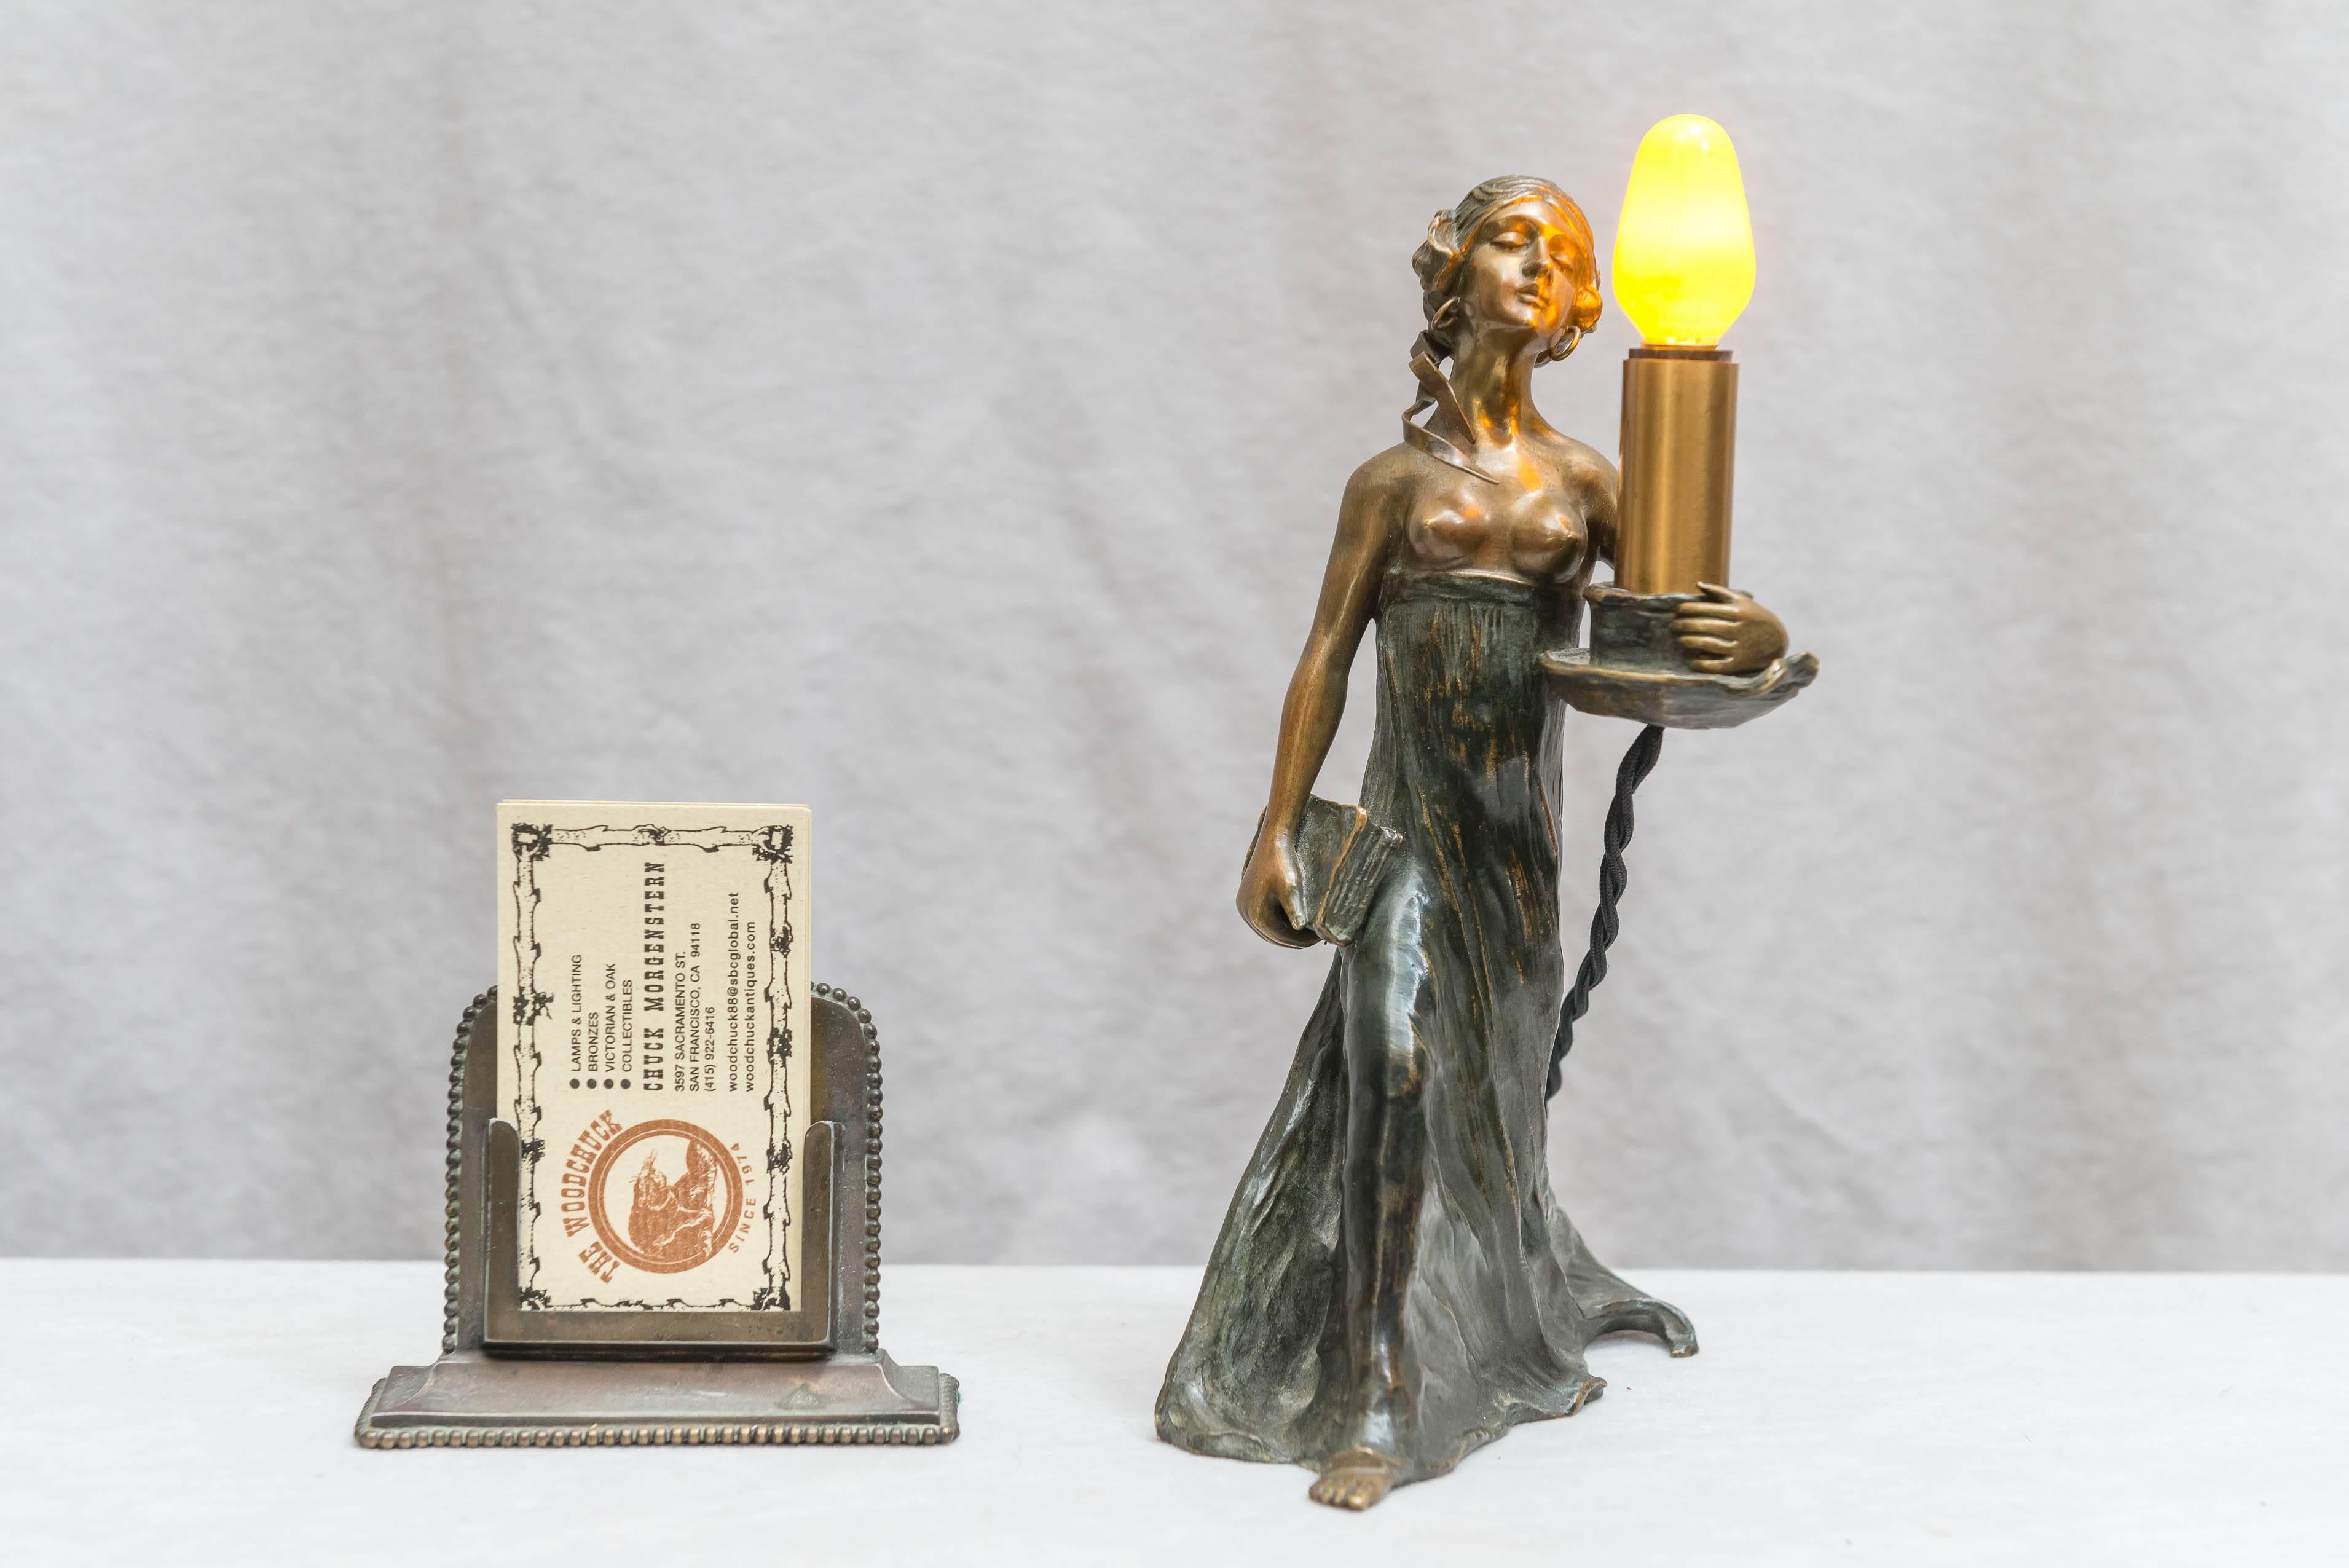 This is a very special little lamp. How do I know, I had it in my own home for many years. The quality of the casting is quite remarkable, and then it's a lamp, and it's my favorite style, Art Nouveau. It's a long story why I am selling it.  I am